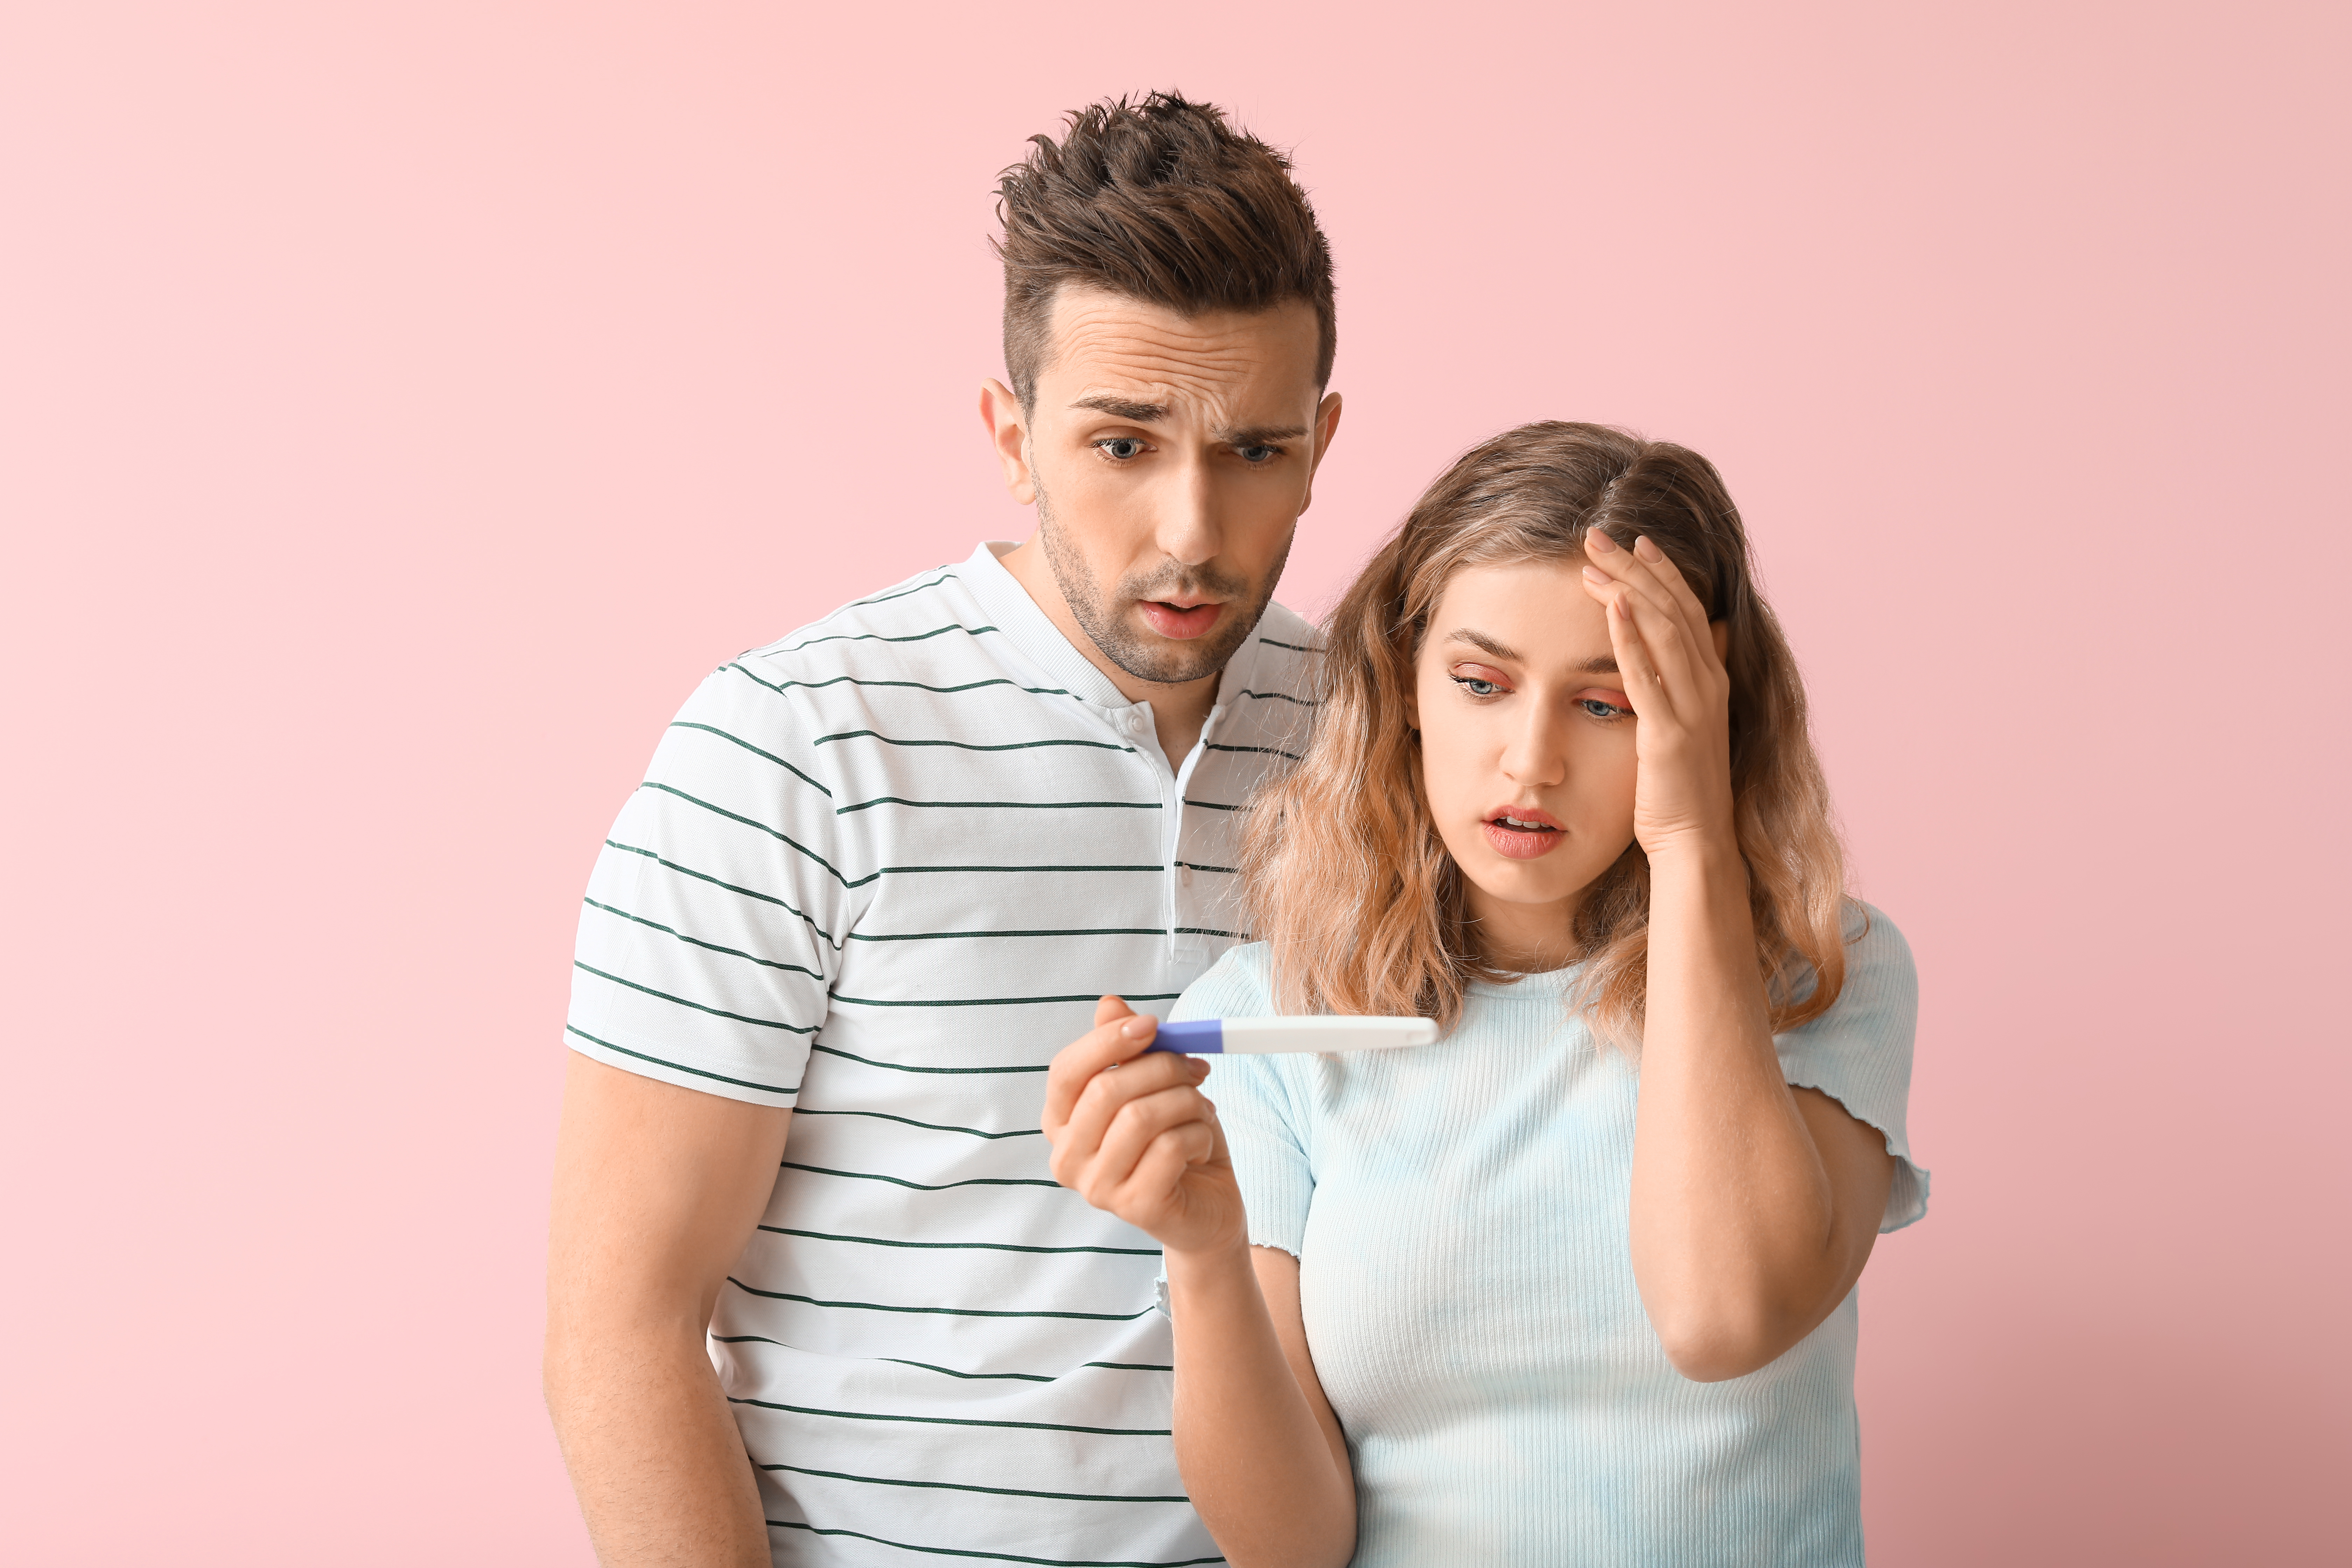 A man and a woman looking at a pregnancy test | Source: Shutterstock